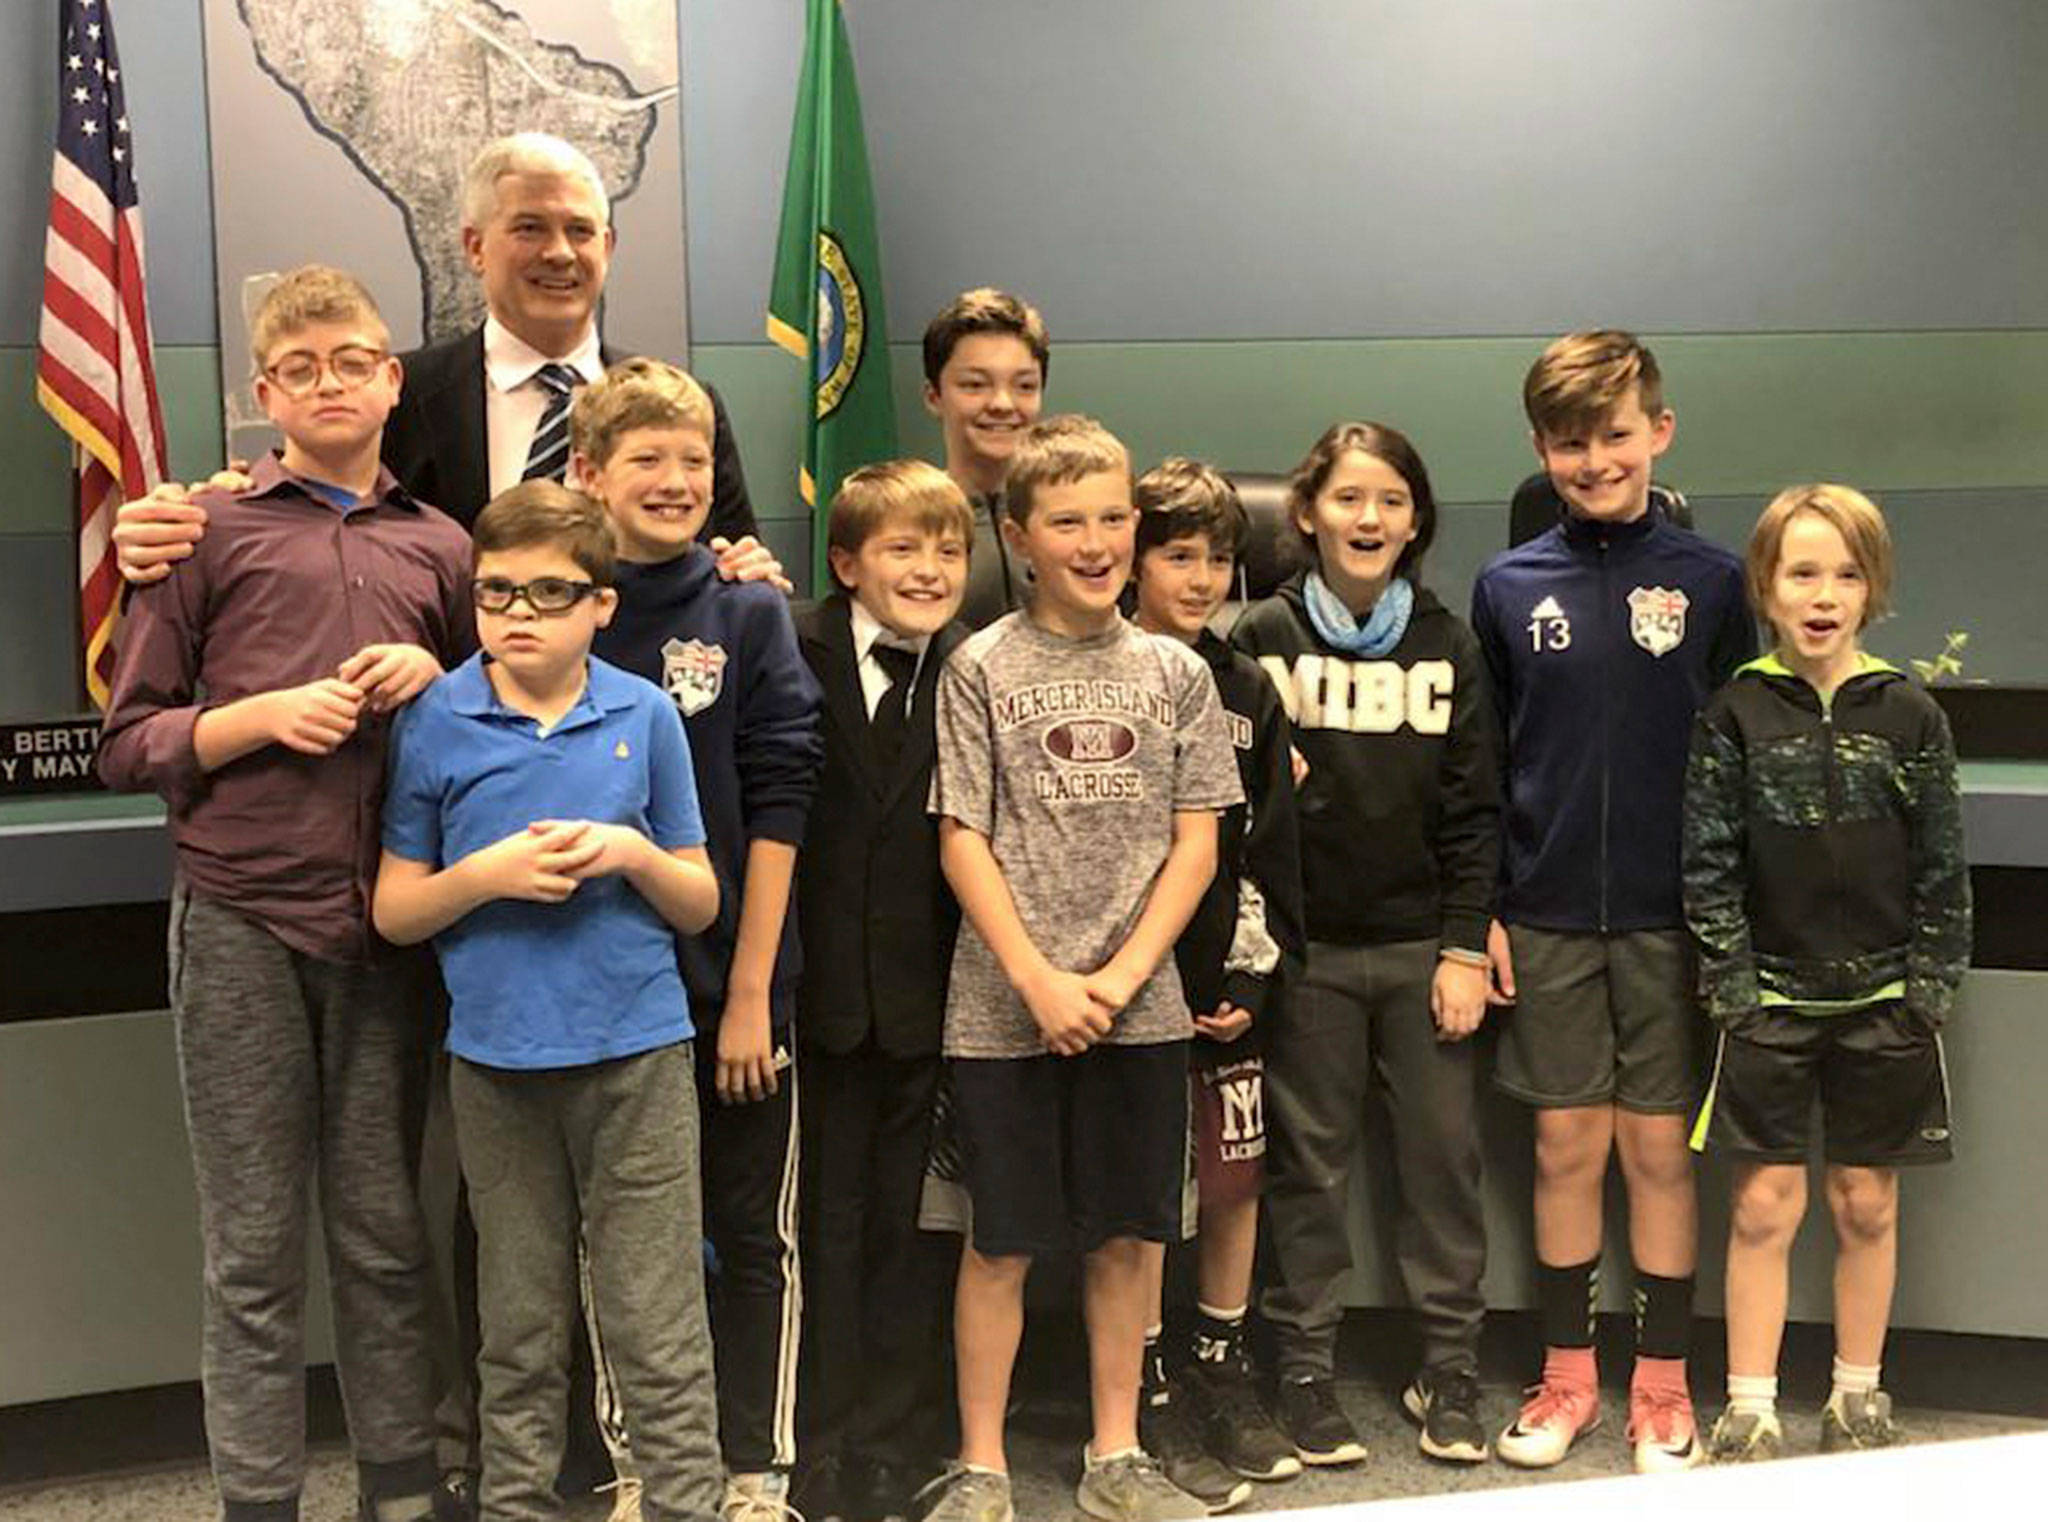 Tom Acker poses with his three sons and other Mercer Island kids after being ceremoniously sworn in to the City Council on Dec. 5. Photo courtesy of Julie Underwood